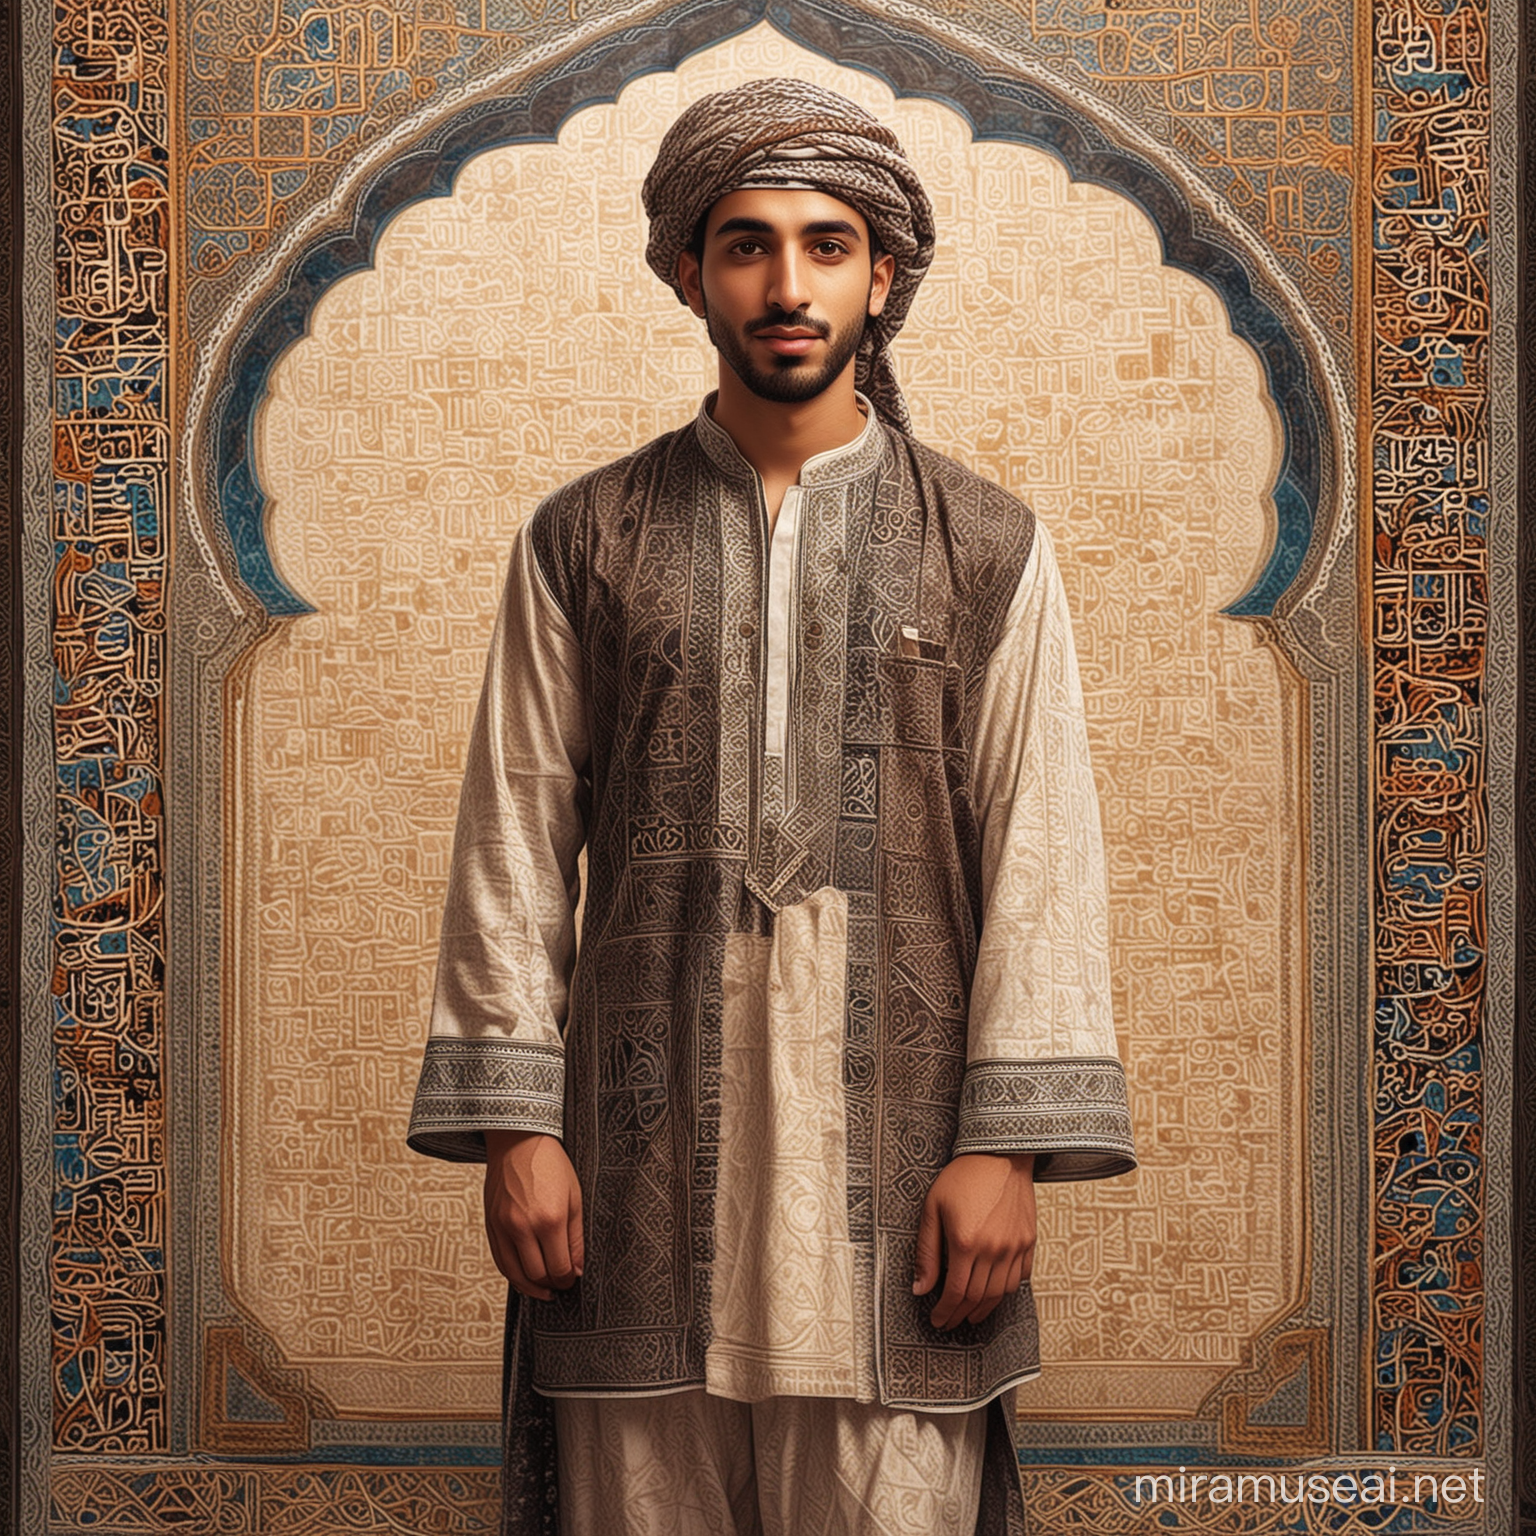 Very cute arab guy 30 years old rare beauty, folk clothing, background with arabic patterns, fantasy art, full body, thin lines, texture, ink drawing, acrylic, vintage, patchwork, detail drawing of short story collection, surreal, tyndall effect 9, lighting Dynamic, sfumato, perfect proportions, high detail, full body